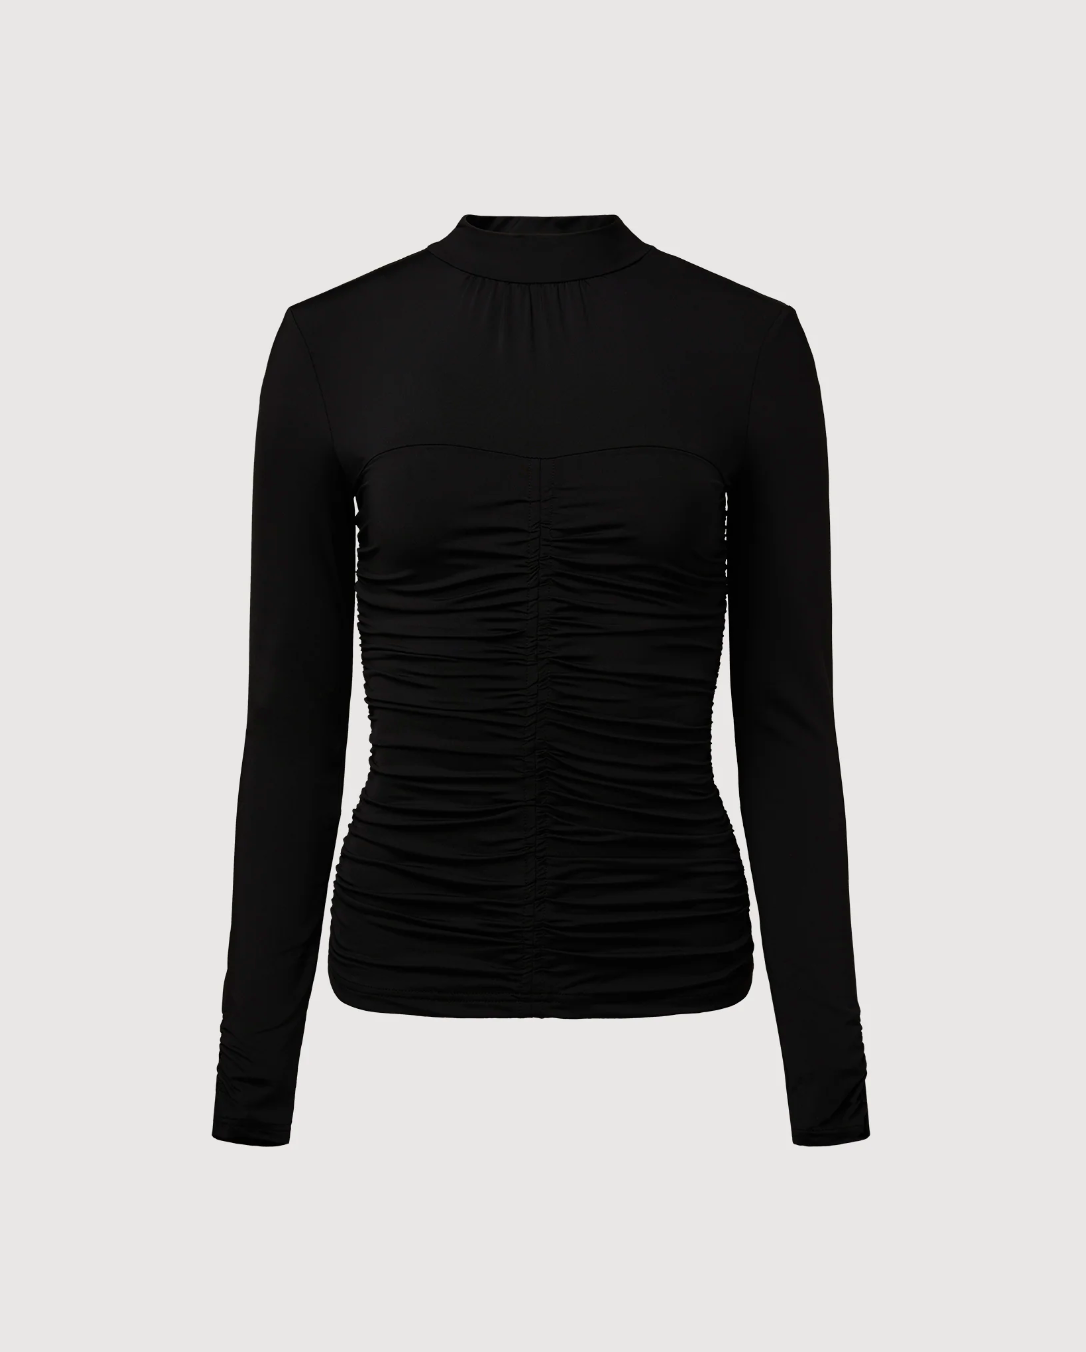 Photo of Long Sleeve Ruched Mock Neck in black from Rachel Parcell available at UniKoncept in Waterloo